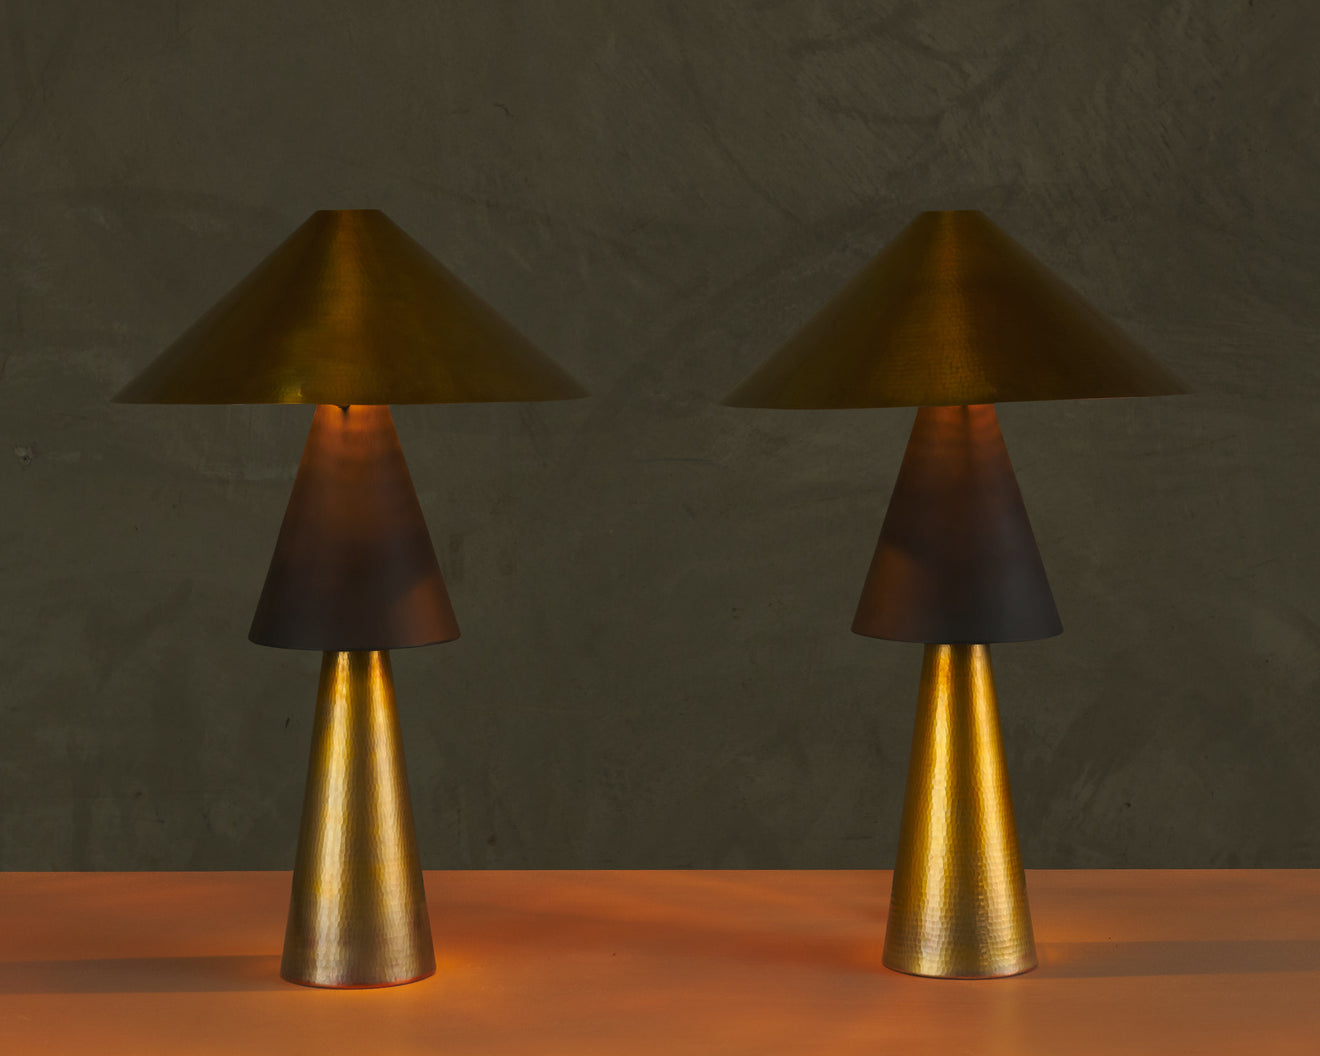 3 TIER HAMMERED TABLE LAMP